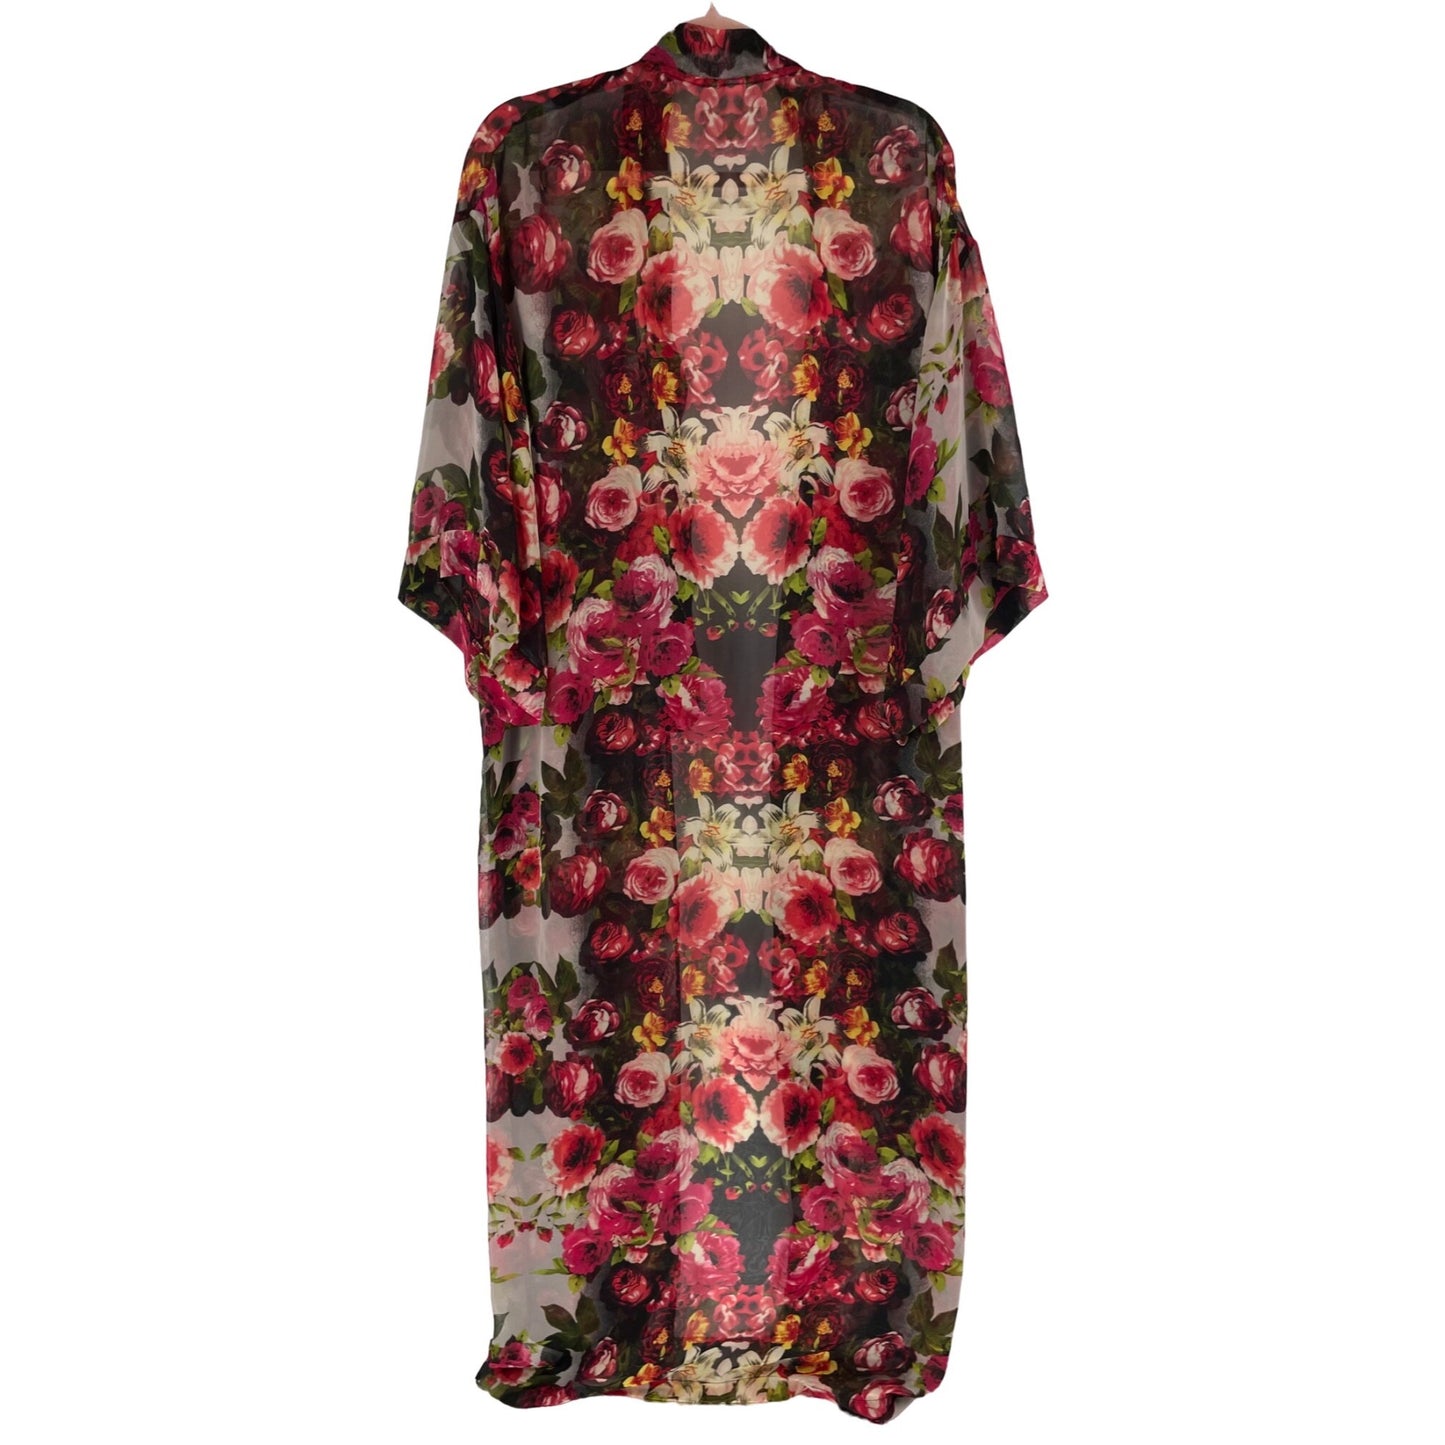 Xhilaration Women's Size Large Multi-Colored Sheer Floral Print Robe